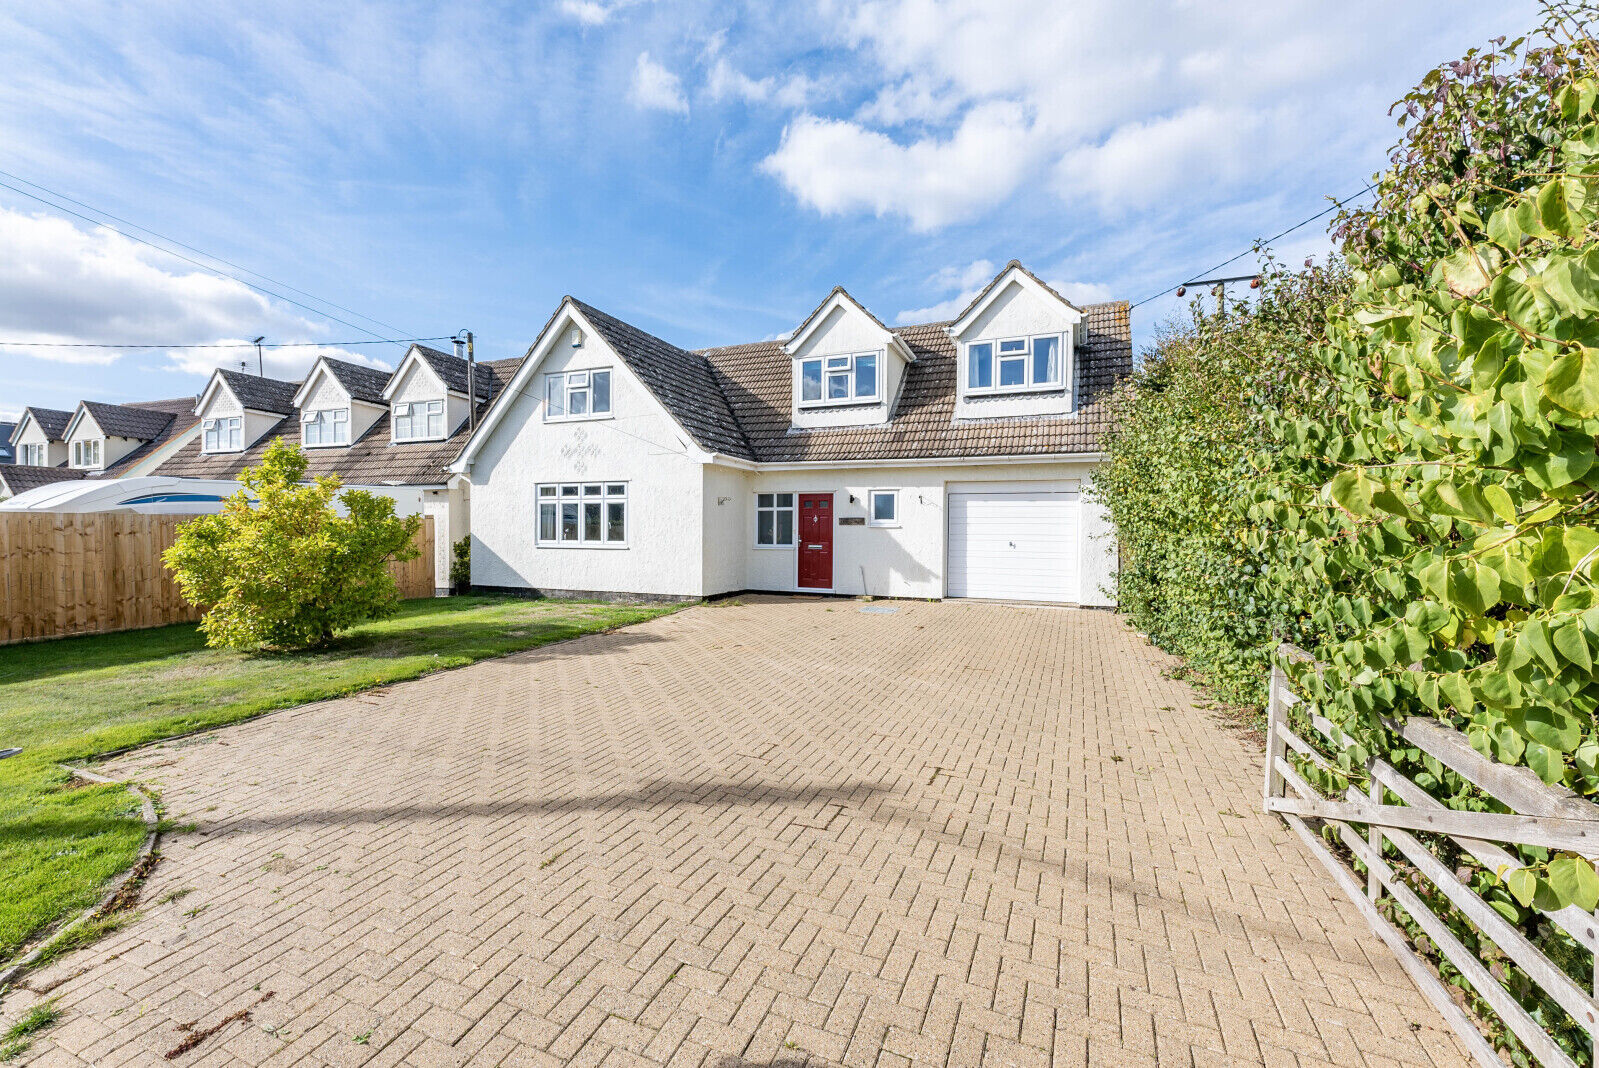 5 bedroom detached house for sale Dunmow Road, Great Bardfield, CM7, main image